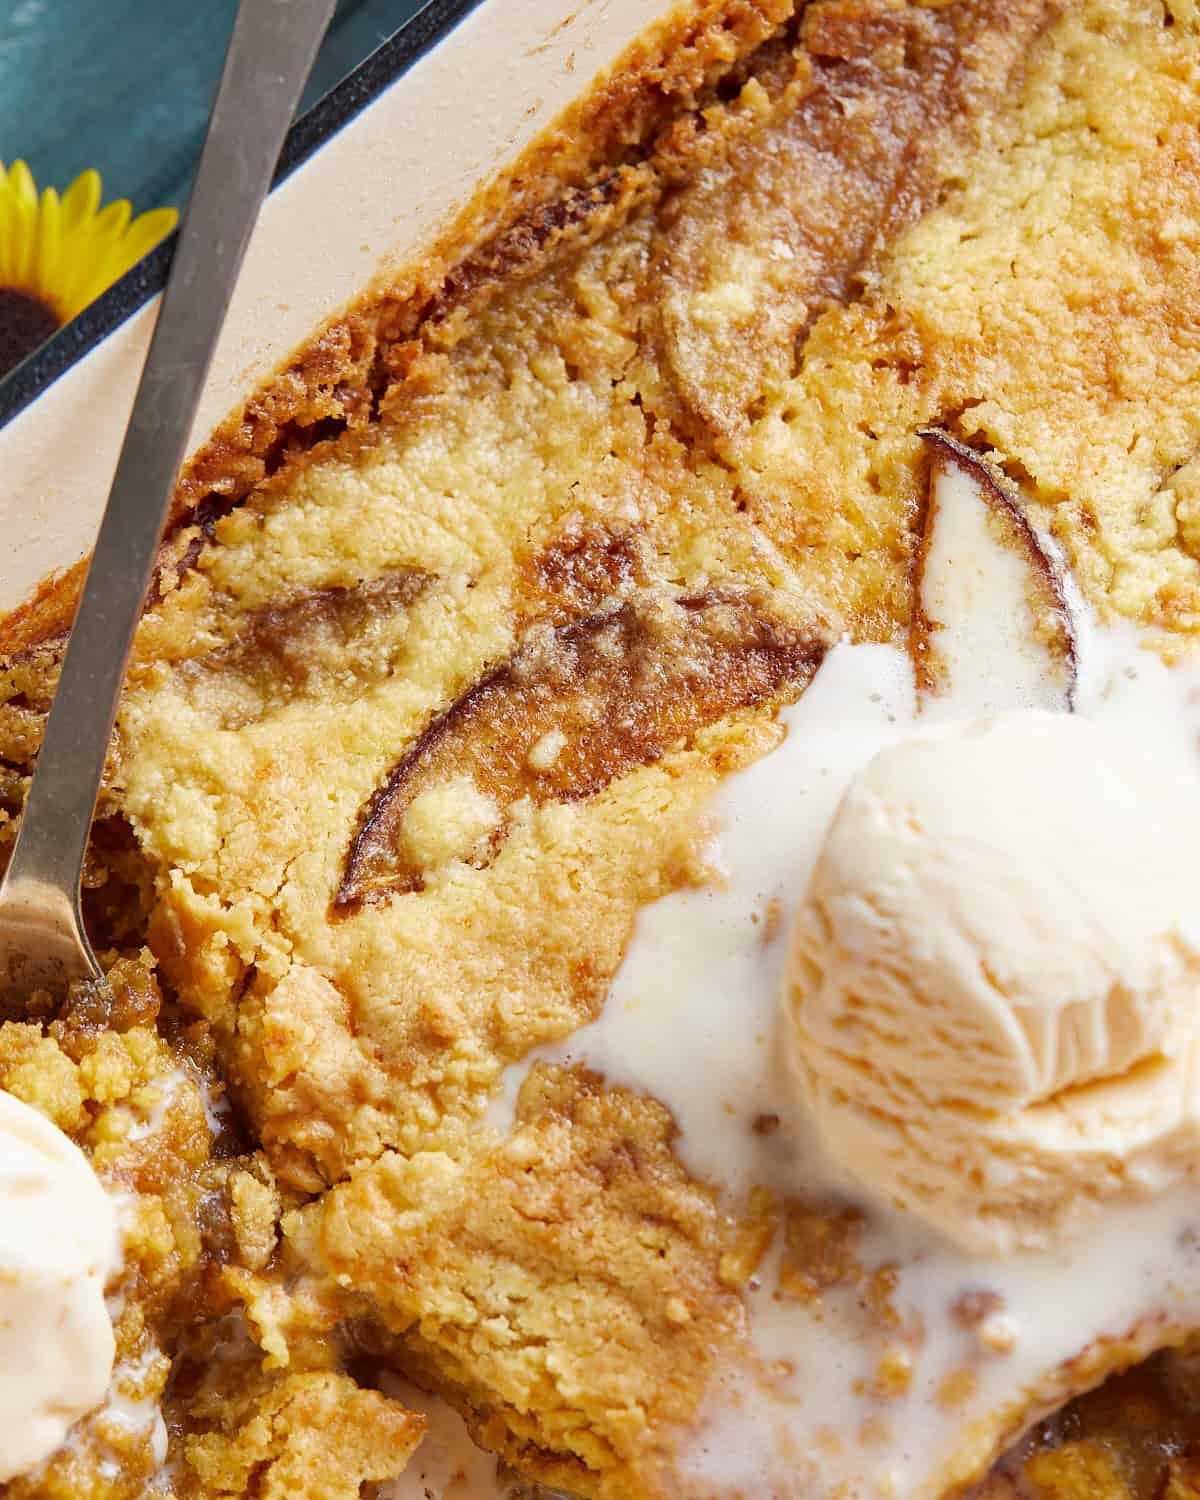 Up close image of peach dump cake with ice cream topping.